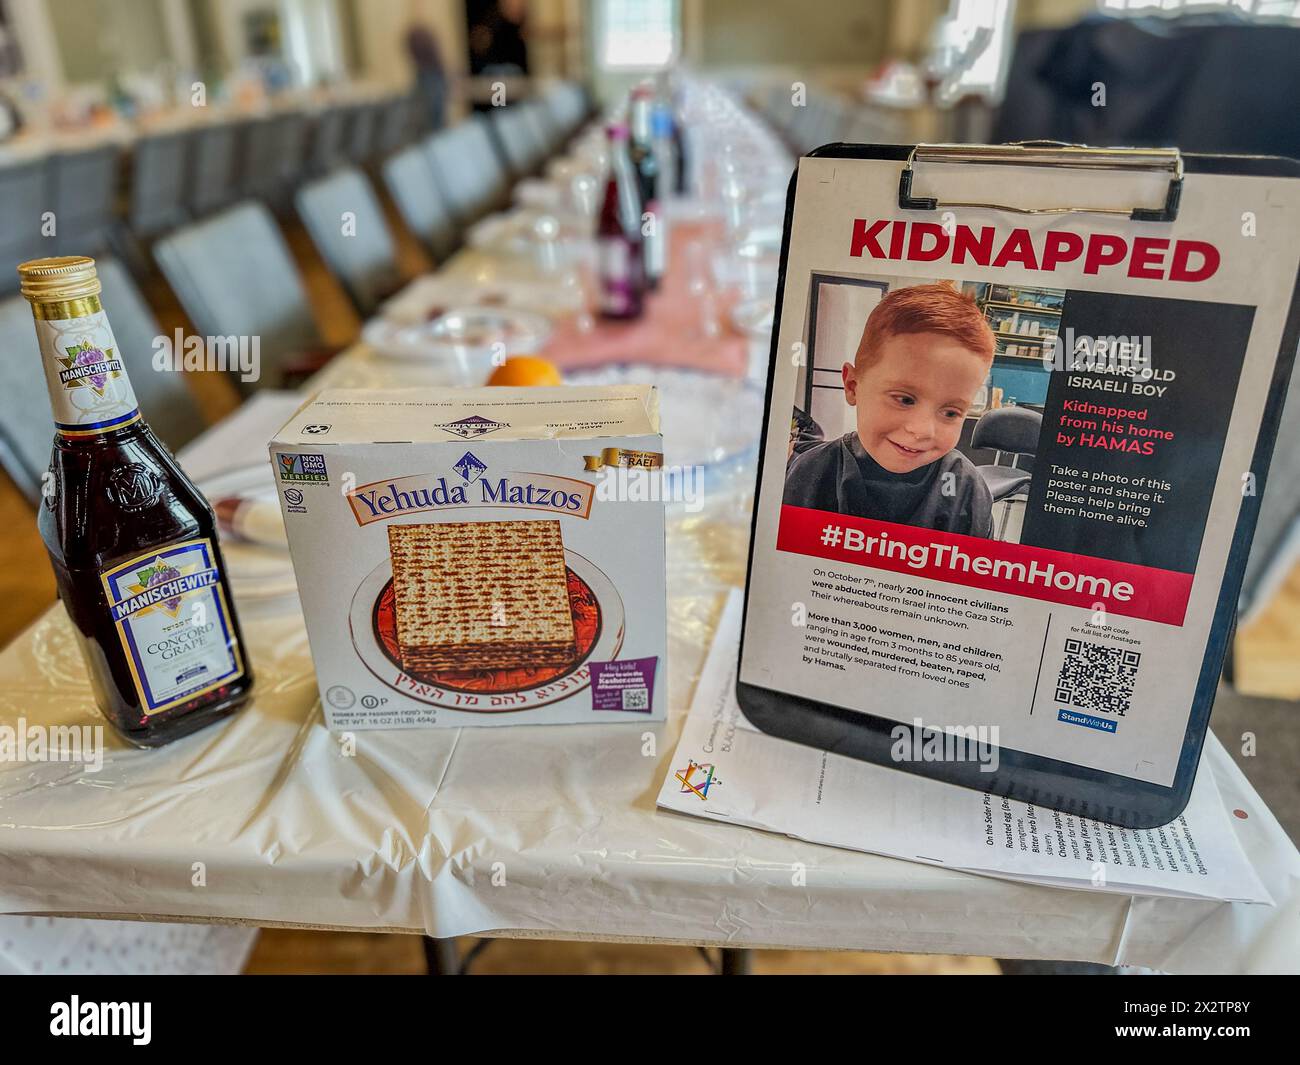 Montecito, California, U.S.A. 23rd Apr, 2024. A 'Kidnapped'' poster of Ariel, a four year old toddler kidnapped by Hamas, on a Passover table in Montecito, California, between a bottle of Kosher wine and a box of Matzos. This is hours before Jews will gather to celebrate Pesach ''” a ritual dinner where the story of how their ancestors in ancient times made the exodus from slavery in Egypt to freedom in Israel. The horrible attack by Hamas on Israel last fall and those hostages still being imprisoned in war-torn Palestine is a present day reminder of the bitterness of oppression, which is a Stock Photo